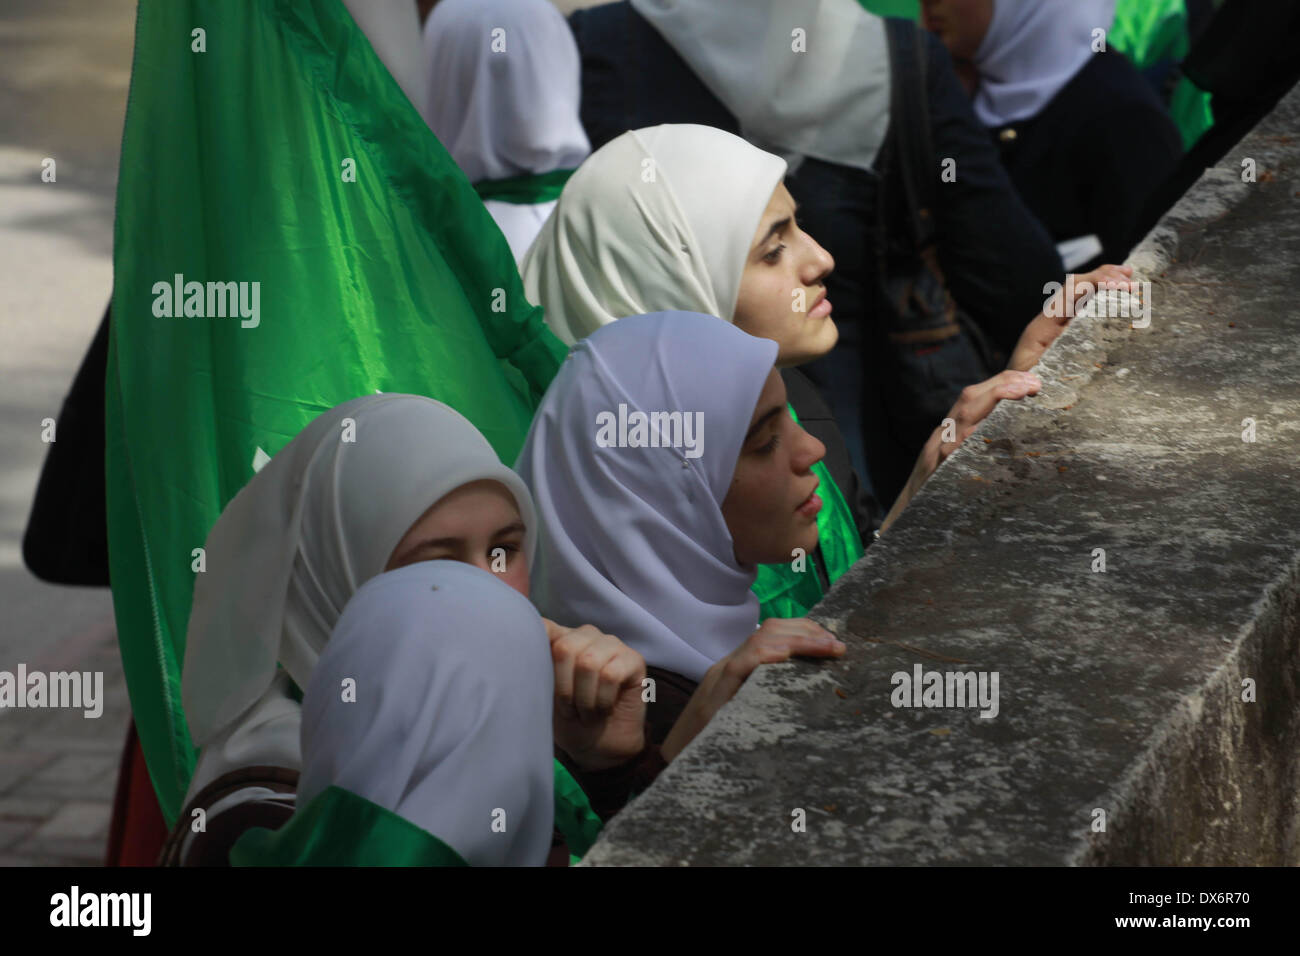 Nablus, West Bank, Palestinian Territory. 19th Mar, 2014. Palestinian women hold Hamas movement's flags during the funeral of Palestinian militant Mohammed Hanbali who was killed 11 years ago during a funeral in the West Bank city of Nablus, March 19, 2014. Since the late 1960s, Israel has withheld the bodies of hundreds of Palestinians. Their bodies are interred in numbered, rather than named, graves in four cemeteries created for that purpose, the biggest of which is located in the Jordan Valley Credit:  Nedal Eshtayah/APA Images/ZUMAPRESS.com/Alamy Live News Stock Photo